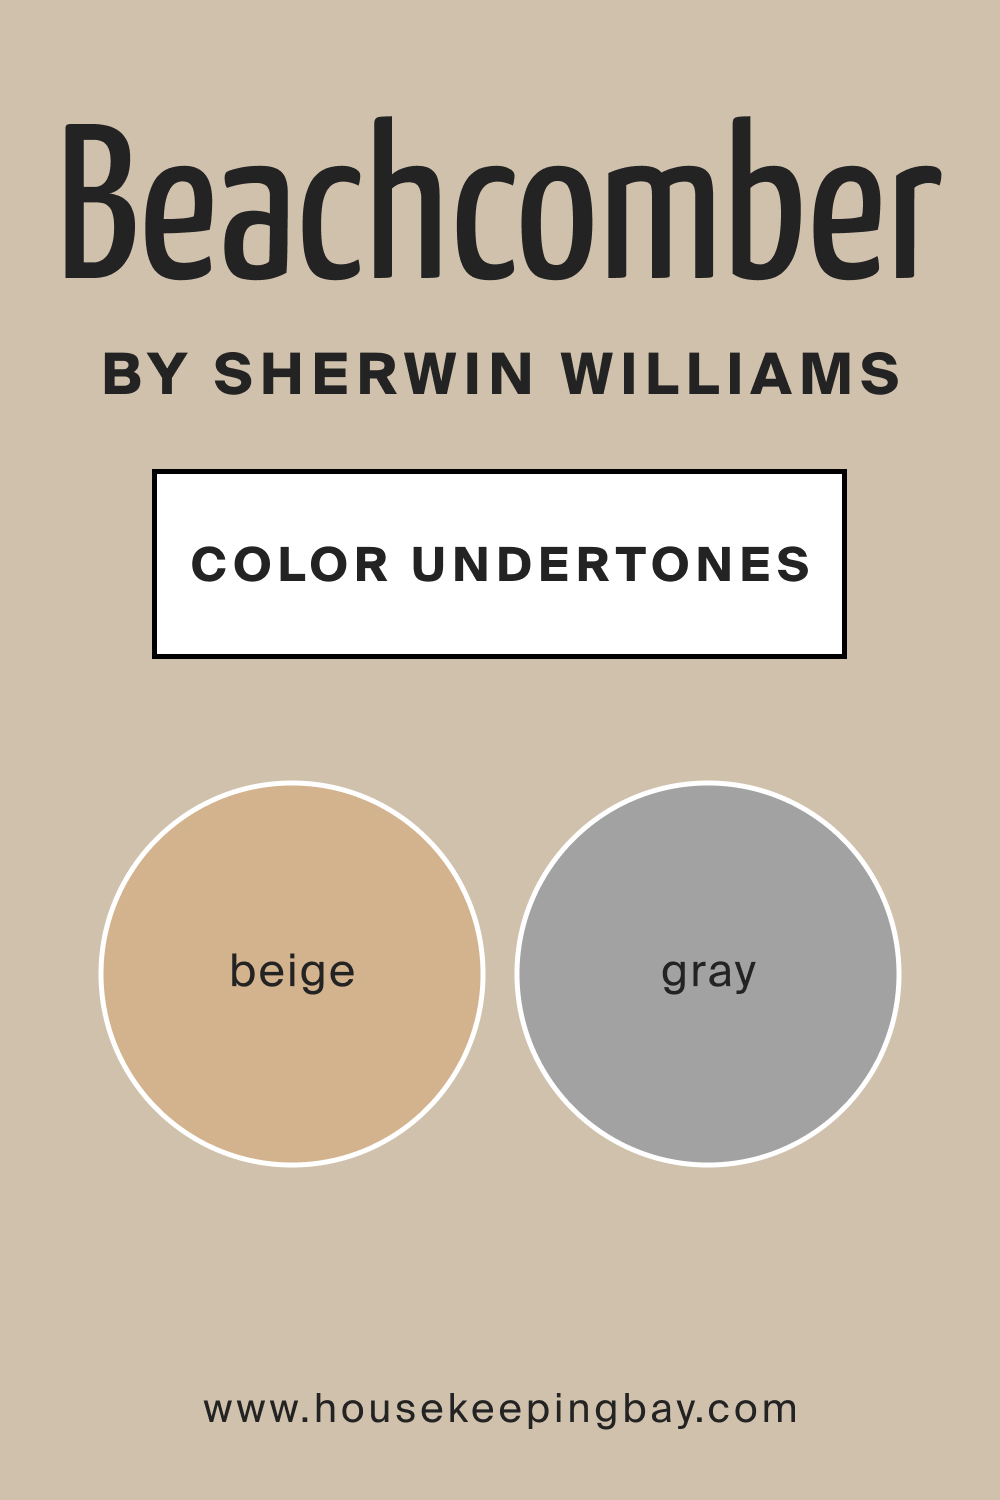 SW 9617 Beachcomber by Sherwin Williams Color Undertone